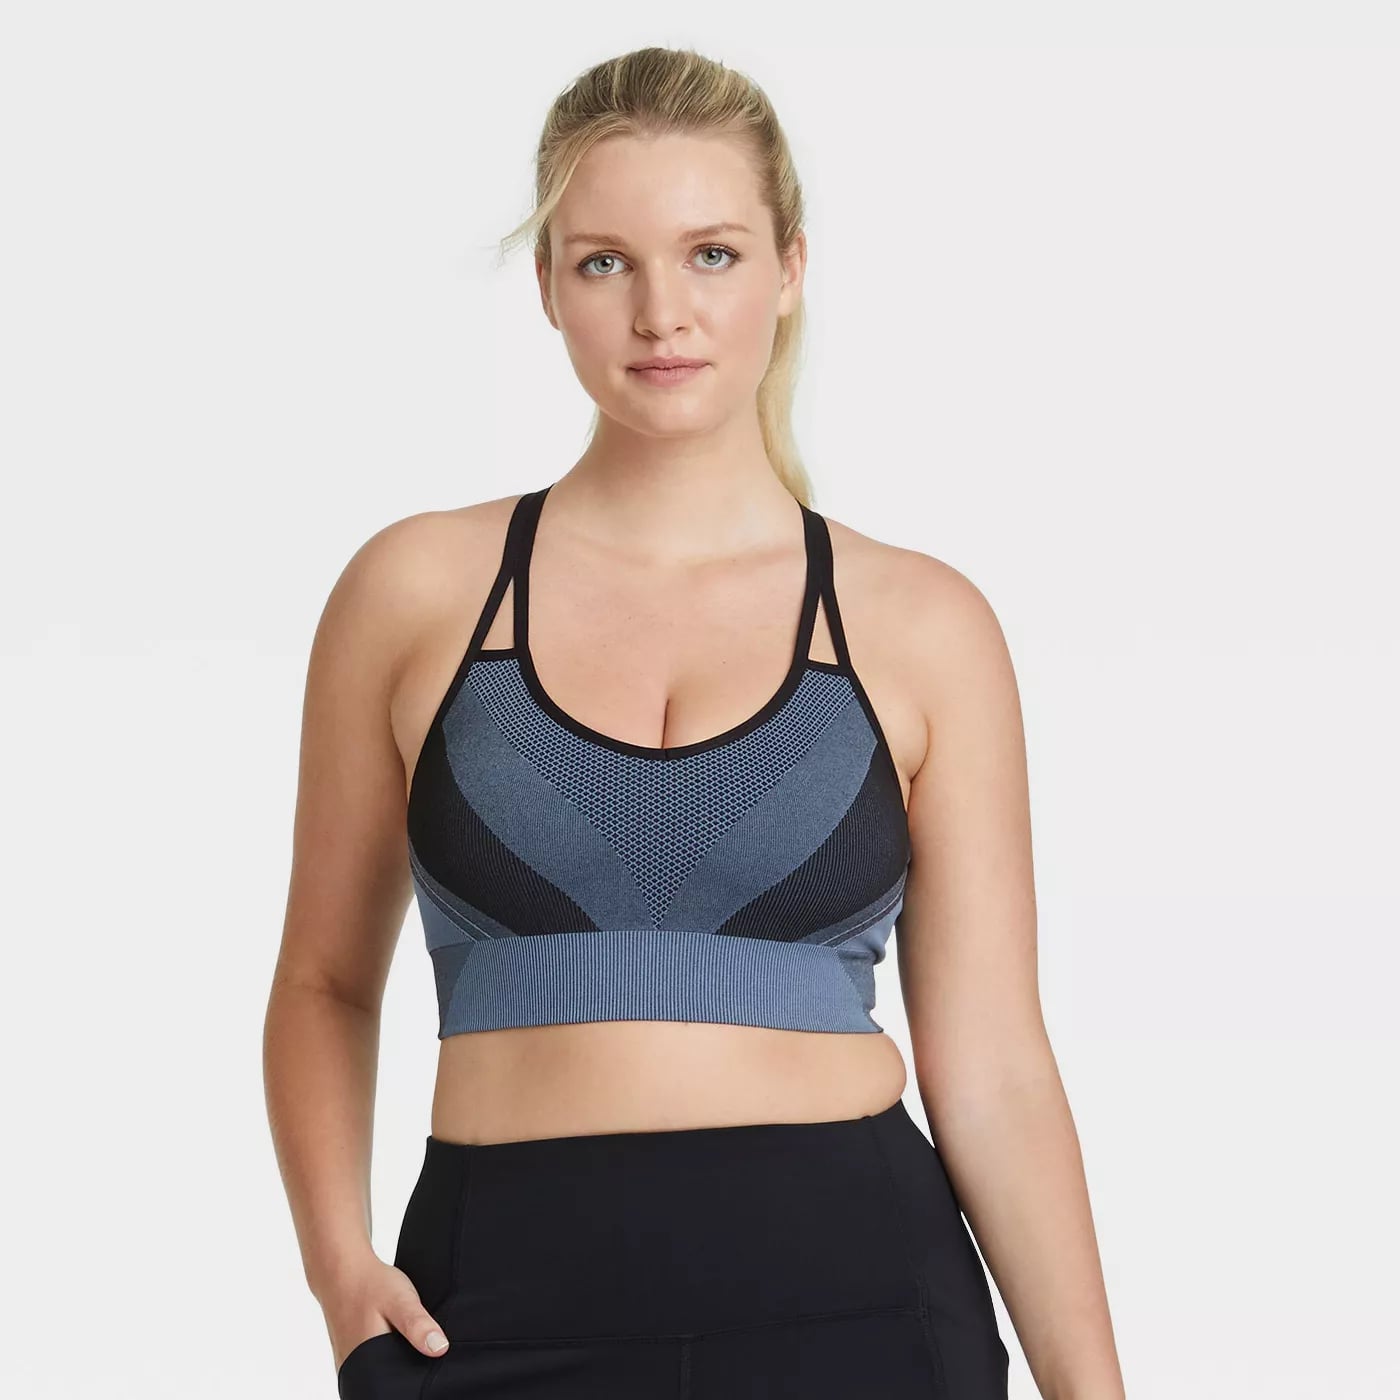 I'm a Yoga Teacher With a 42G Bust — These Are My Go-To Low-Impact Sports  Bras